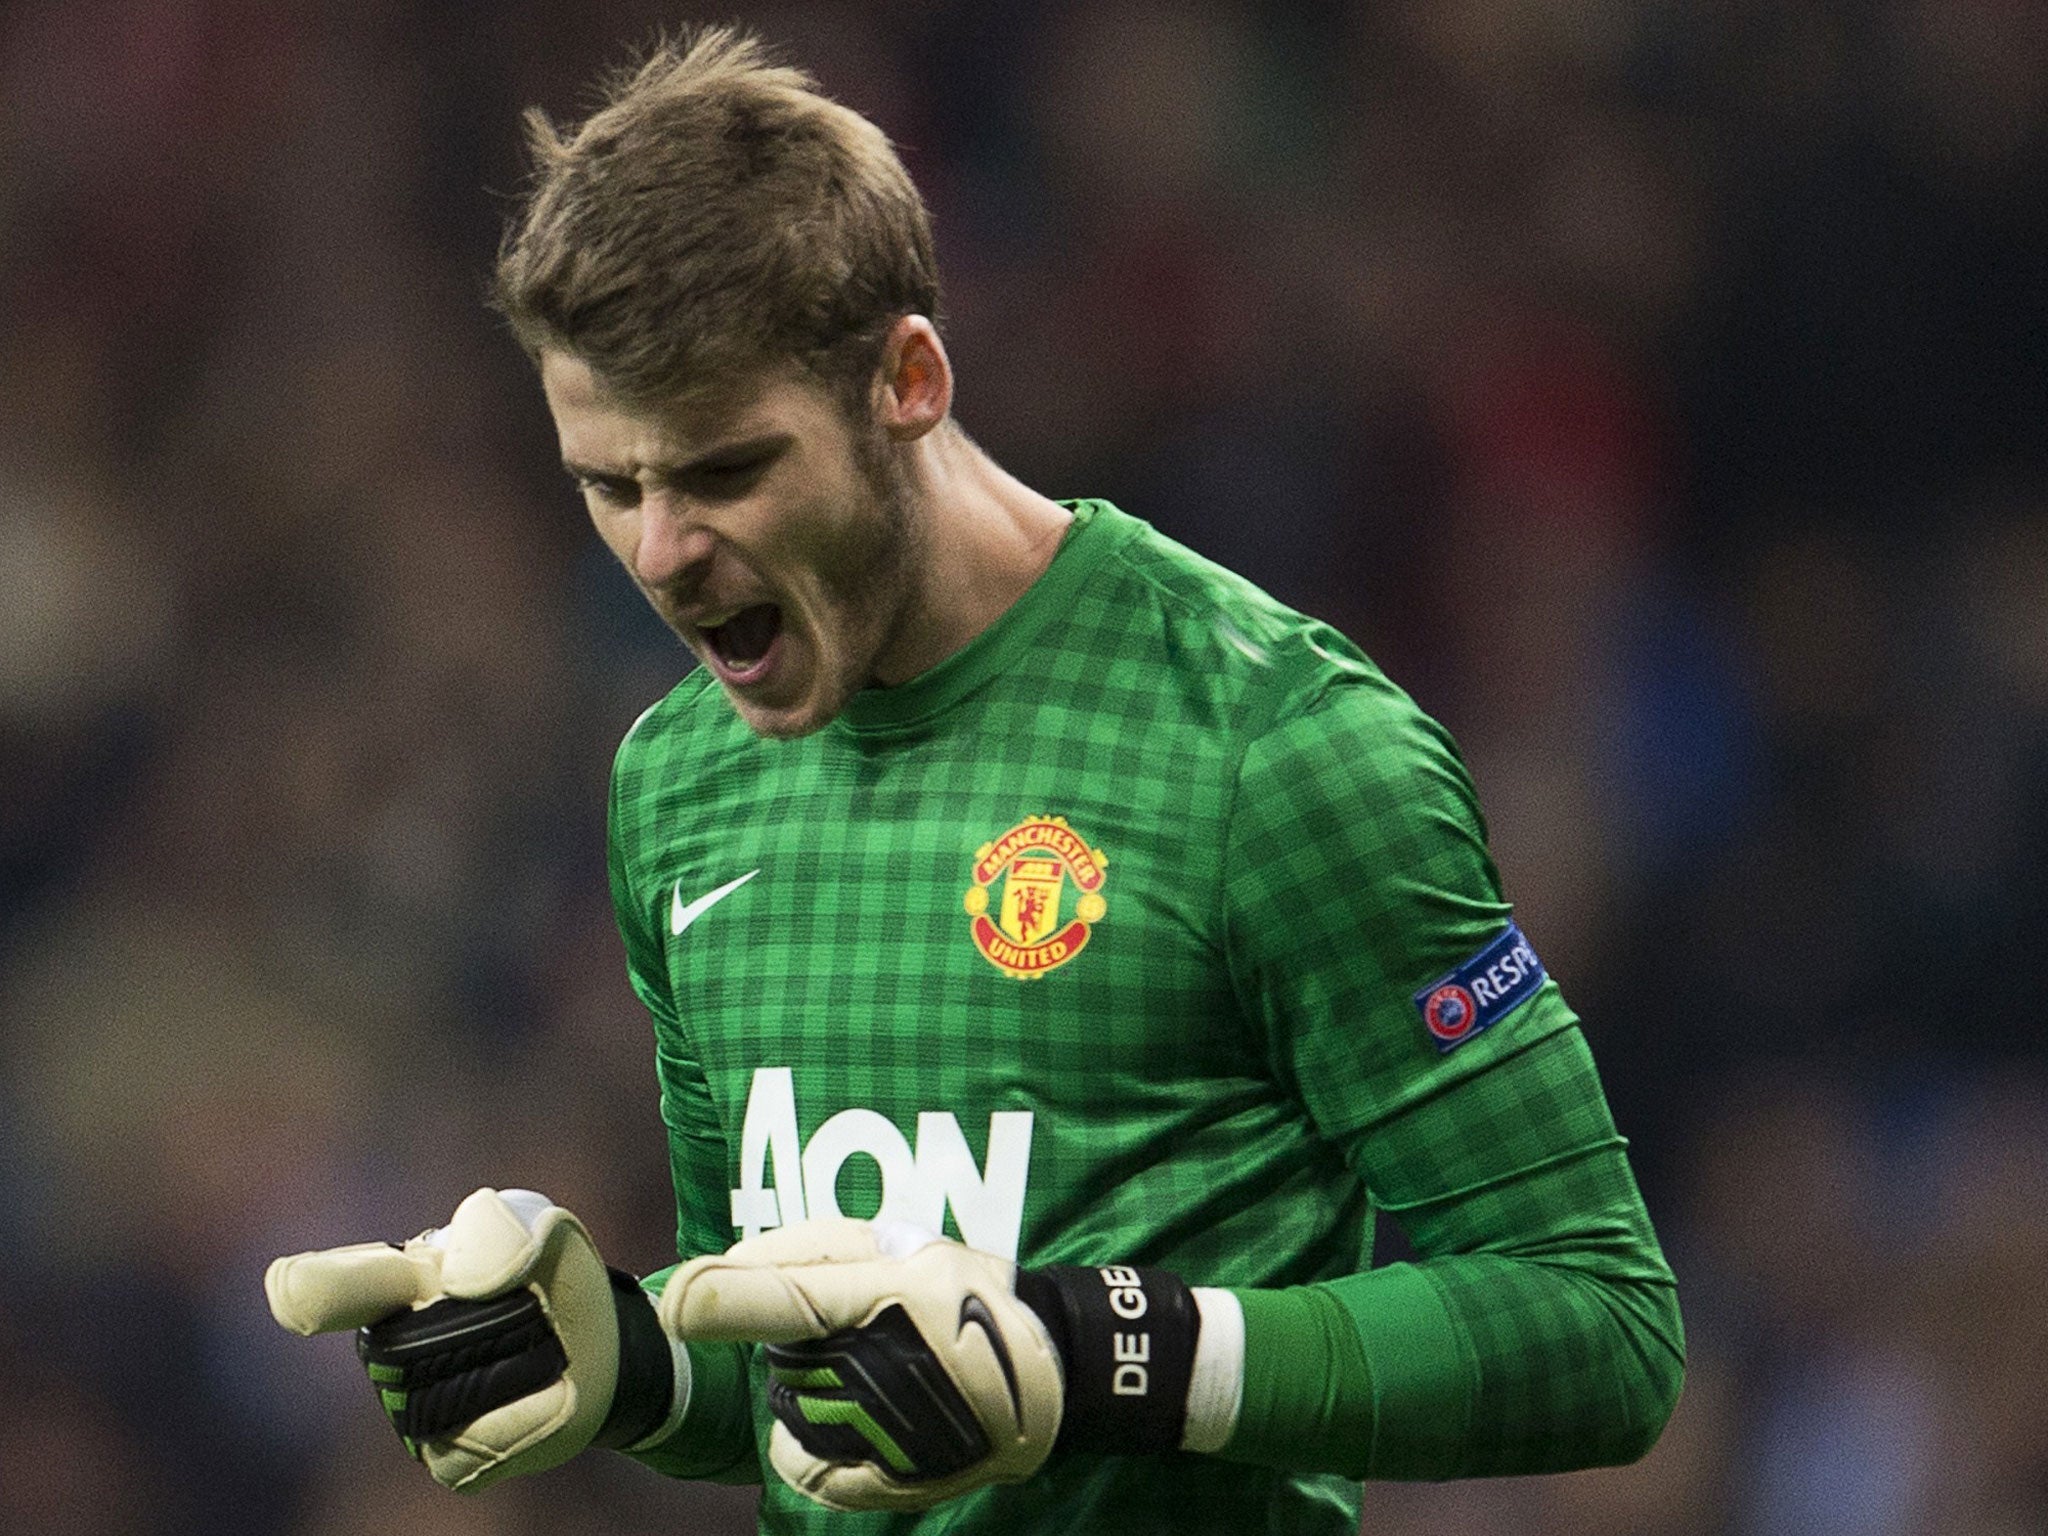 Manchester United goalkeeper David de Gea celebrates at the end of Wednesday’s match at the Bernabeu